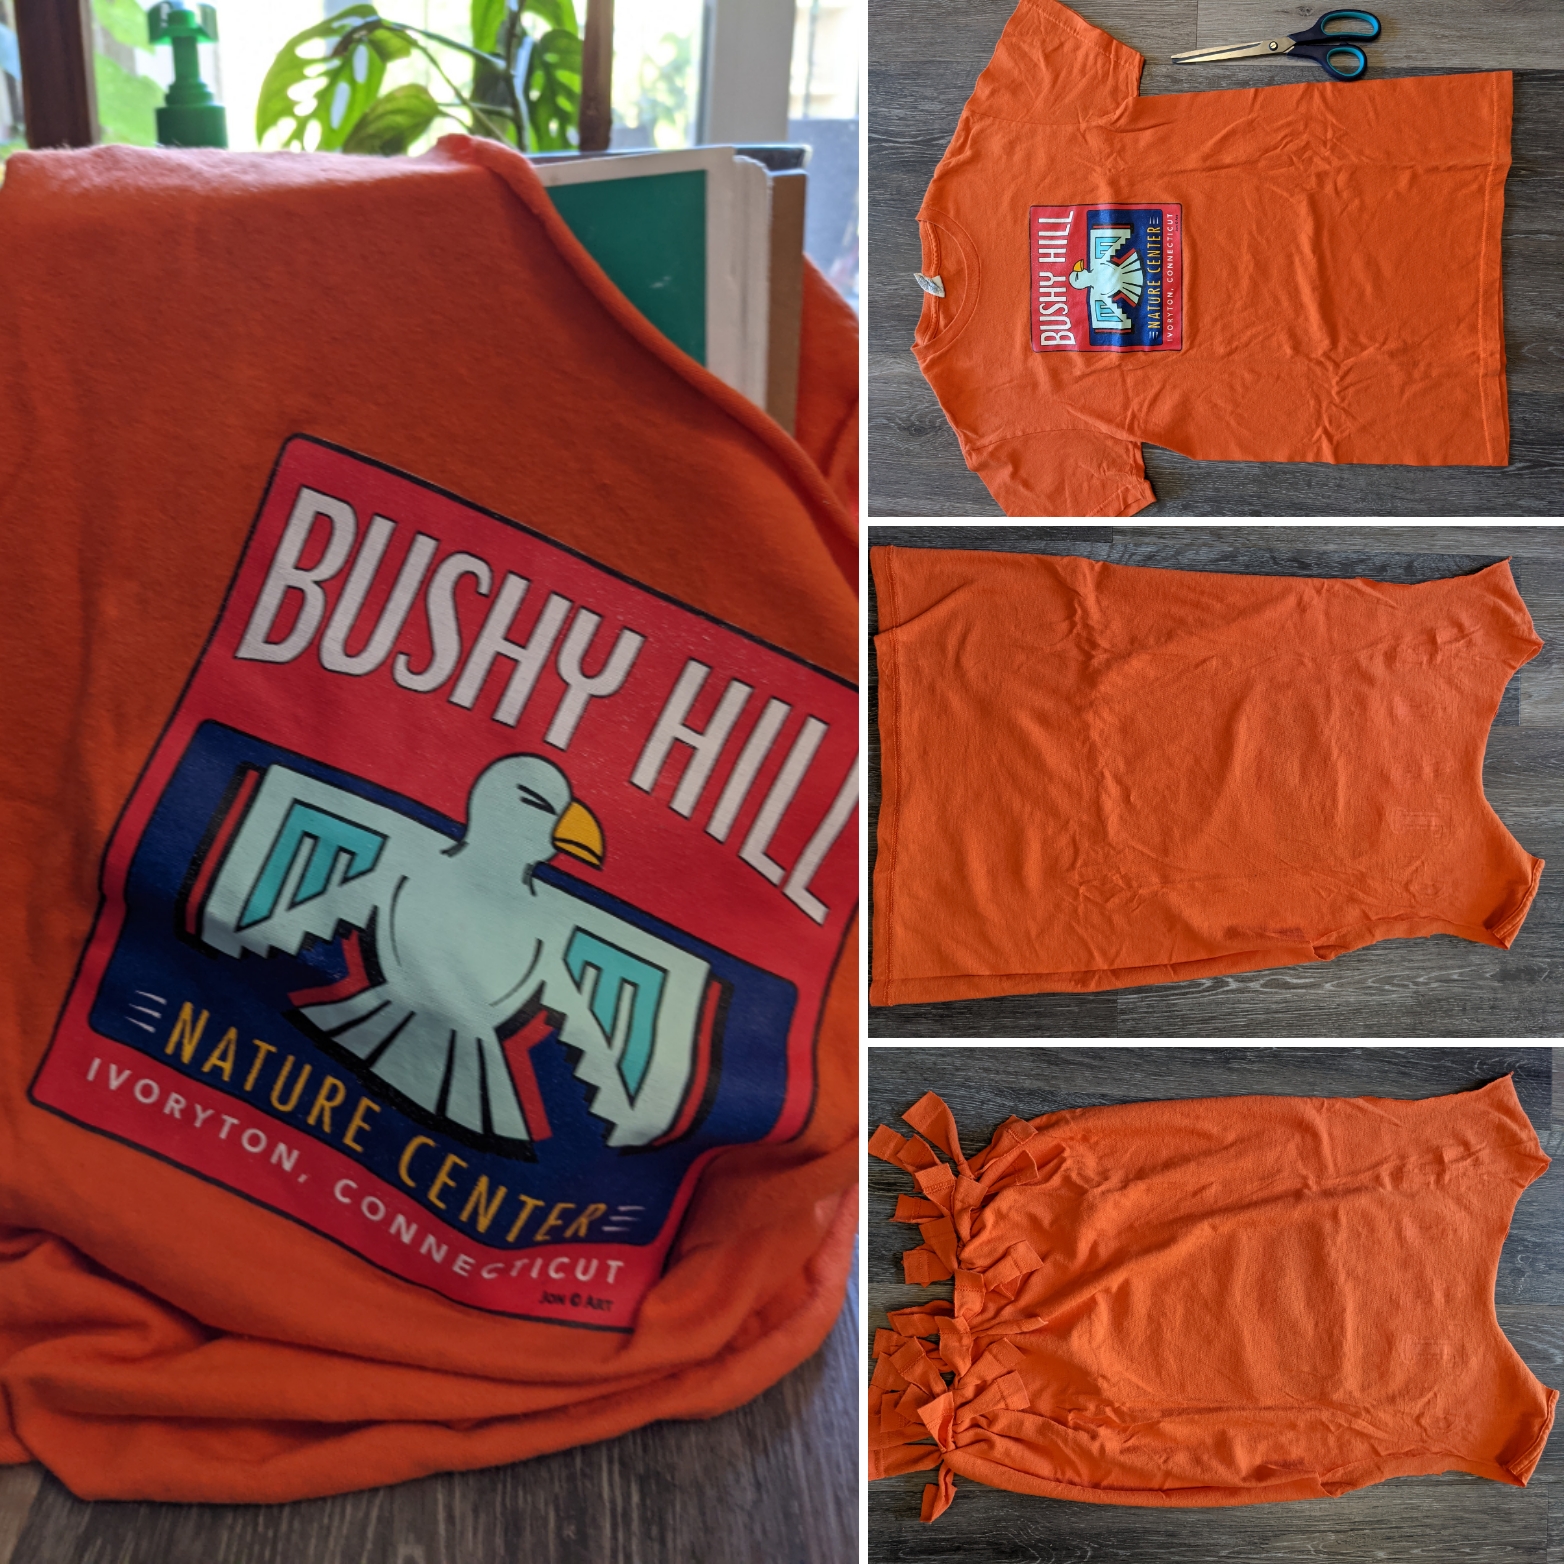 An old t-shirt in the process of becoming a reusable bag.